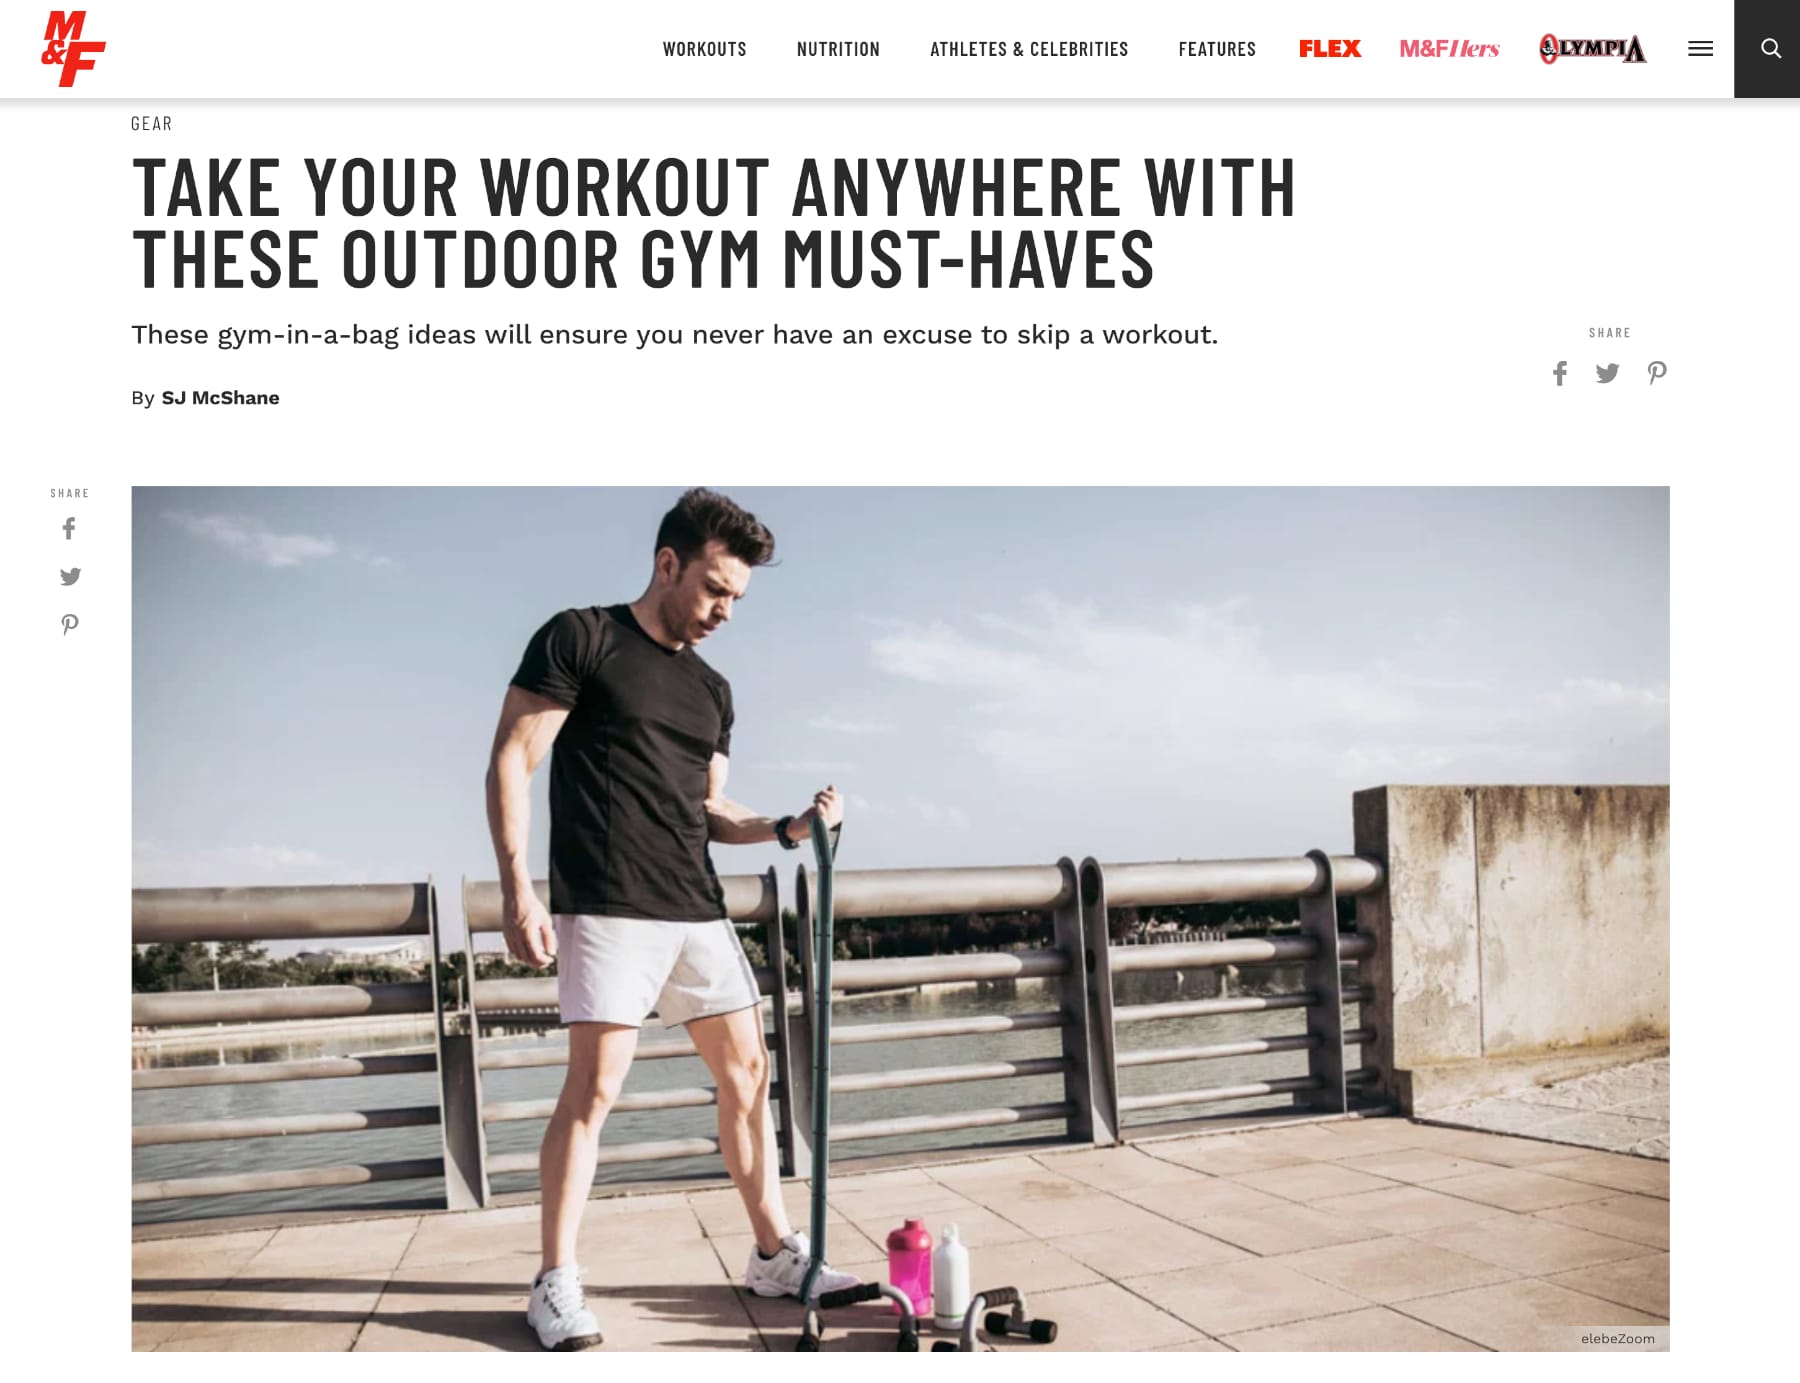 Muscle & Fitness: Take Your Workout Anywhere With These Outdoor Gym Must-Haves